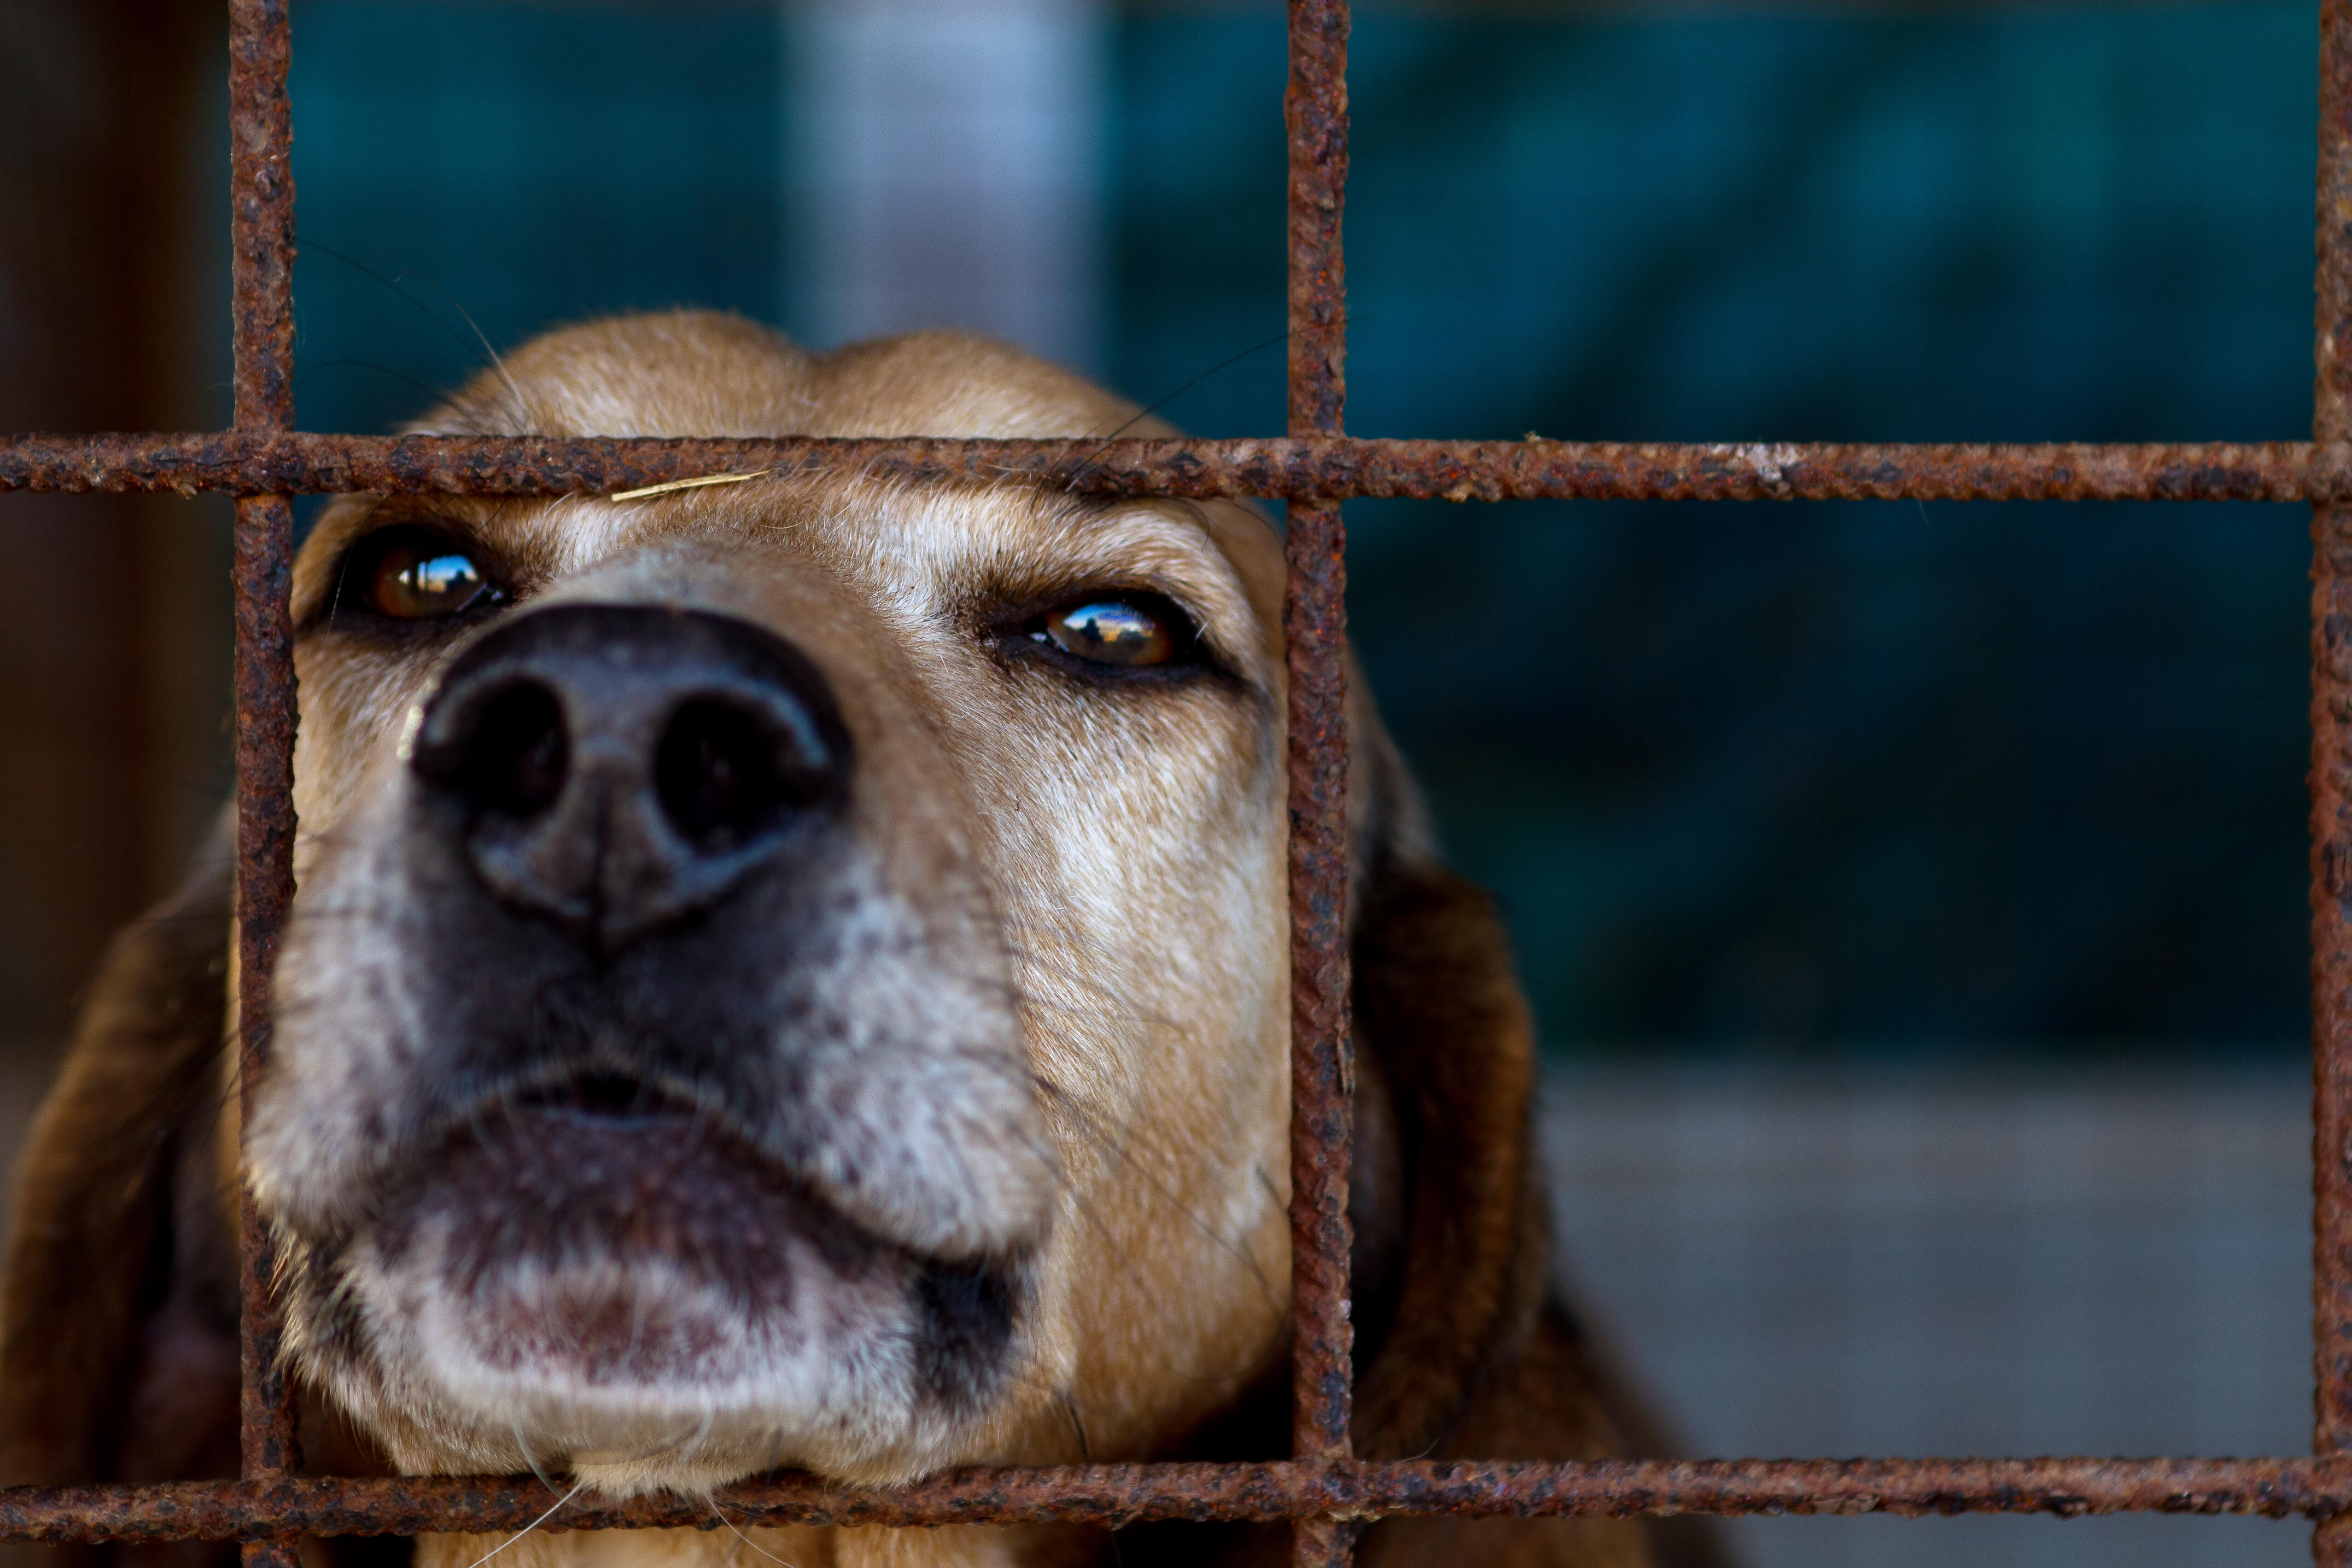 Florida Woman Fined $500 For Giving Lost Dog To Animal Shelter | iHeart